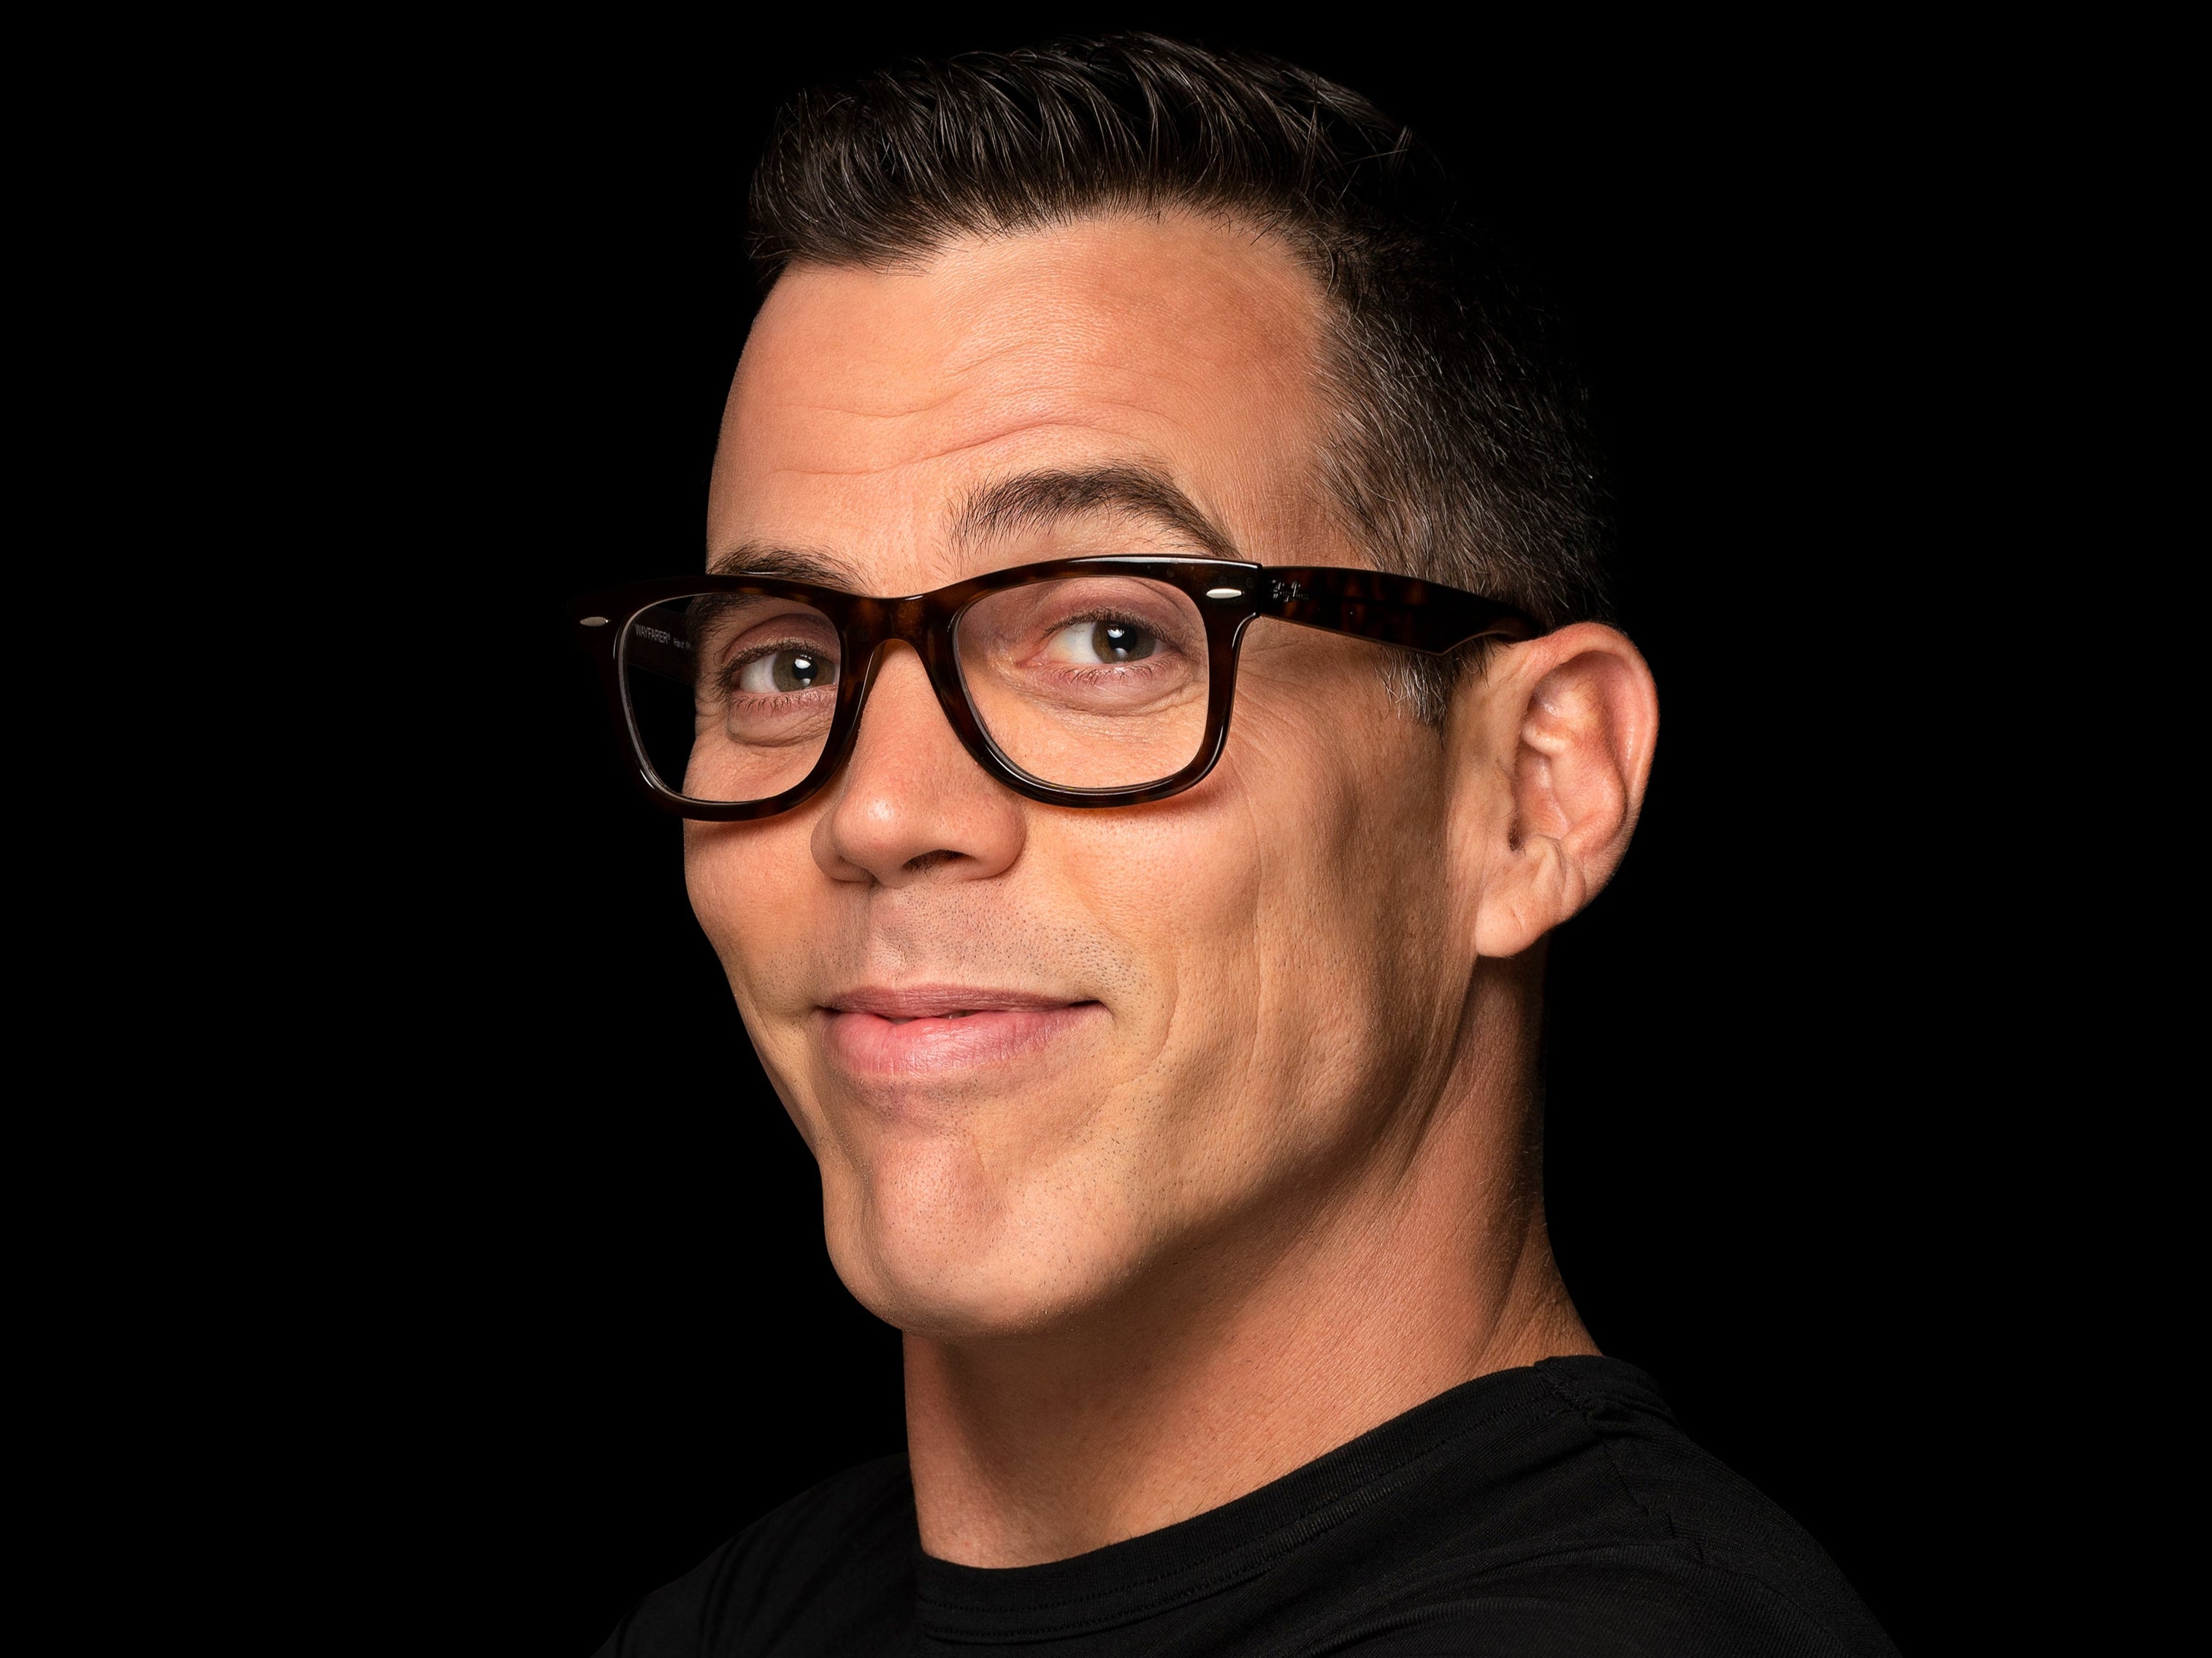 SteveO interview ‘It occurred to me I could probably fire a bullet